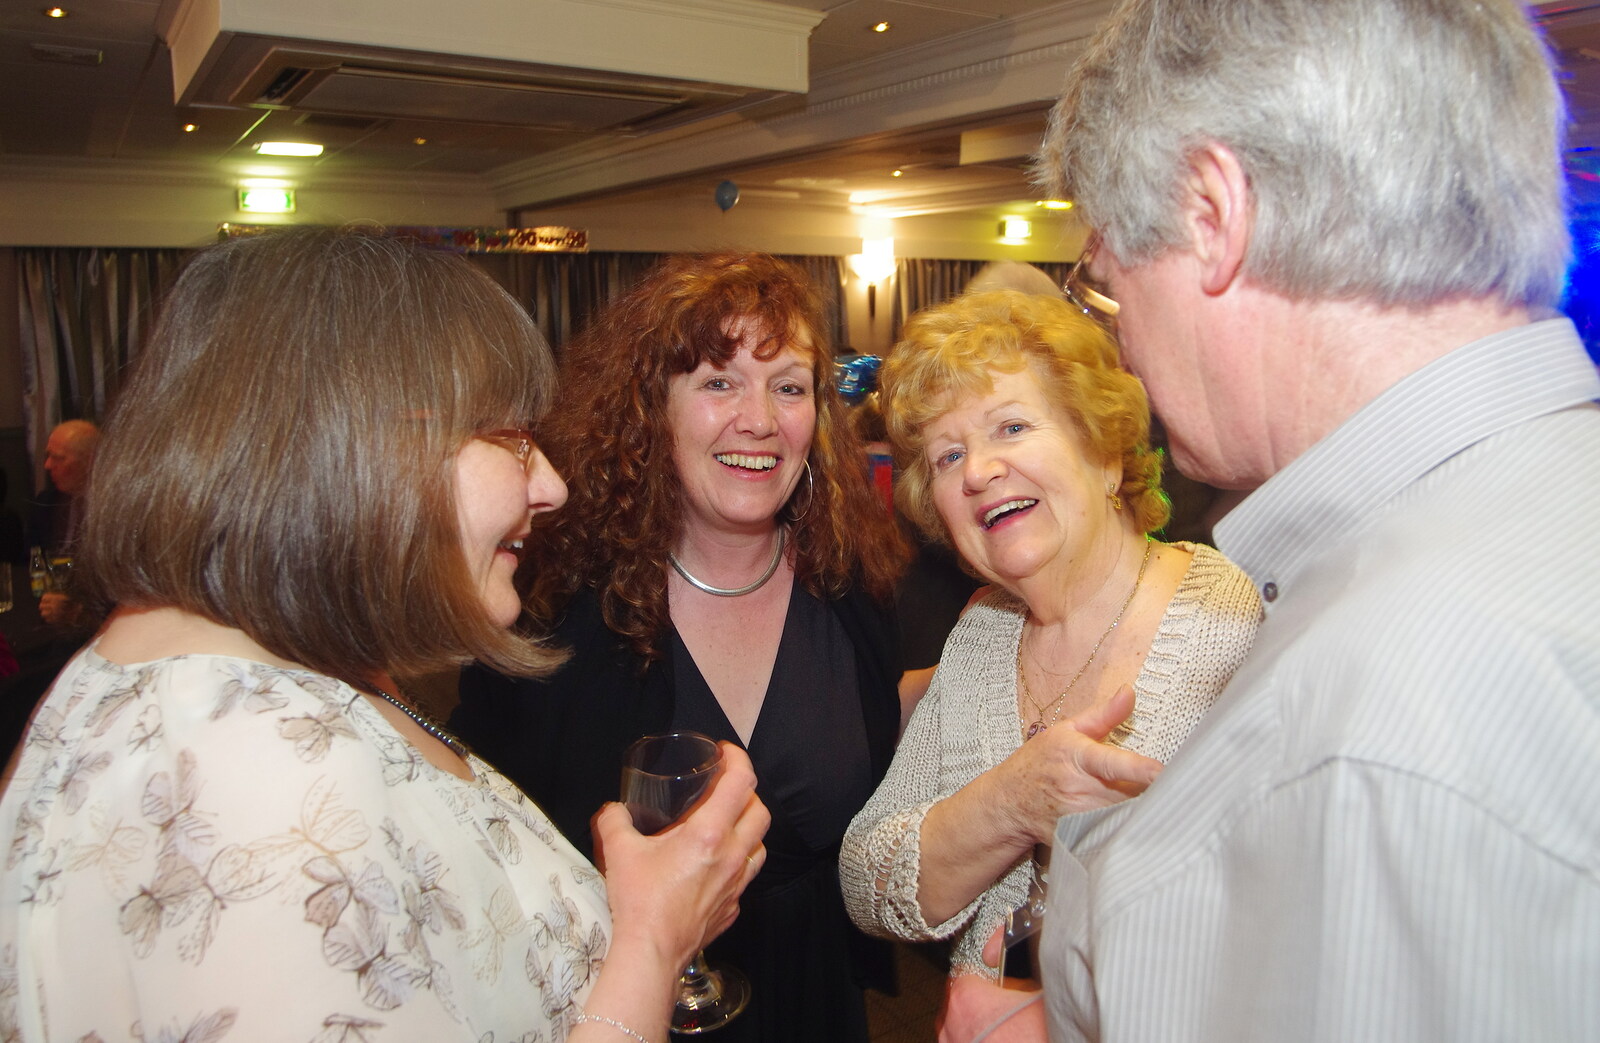 Cathy and Josephine chat to N&C from Uncle James's Ninetieth Birthday, Cheadle Hulme, Manchester - 20th April 2013